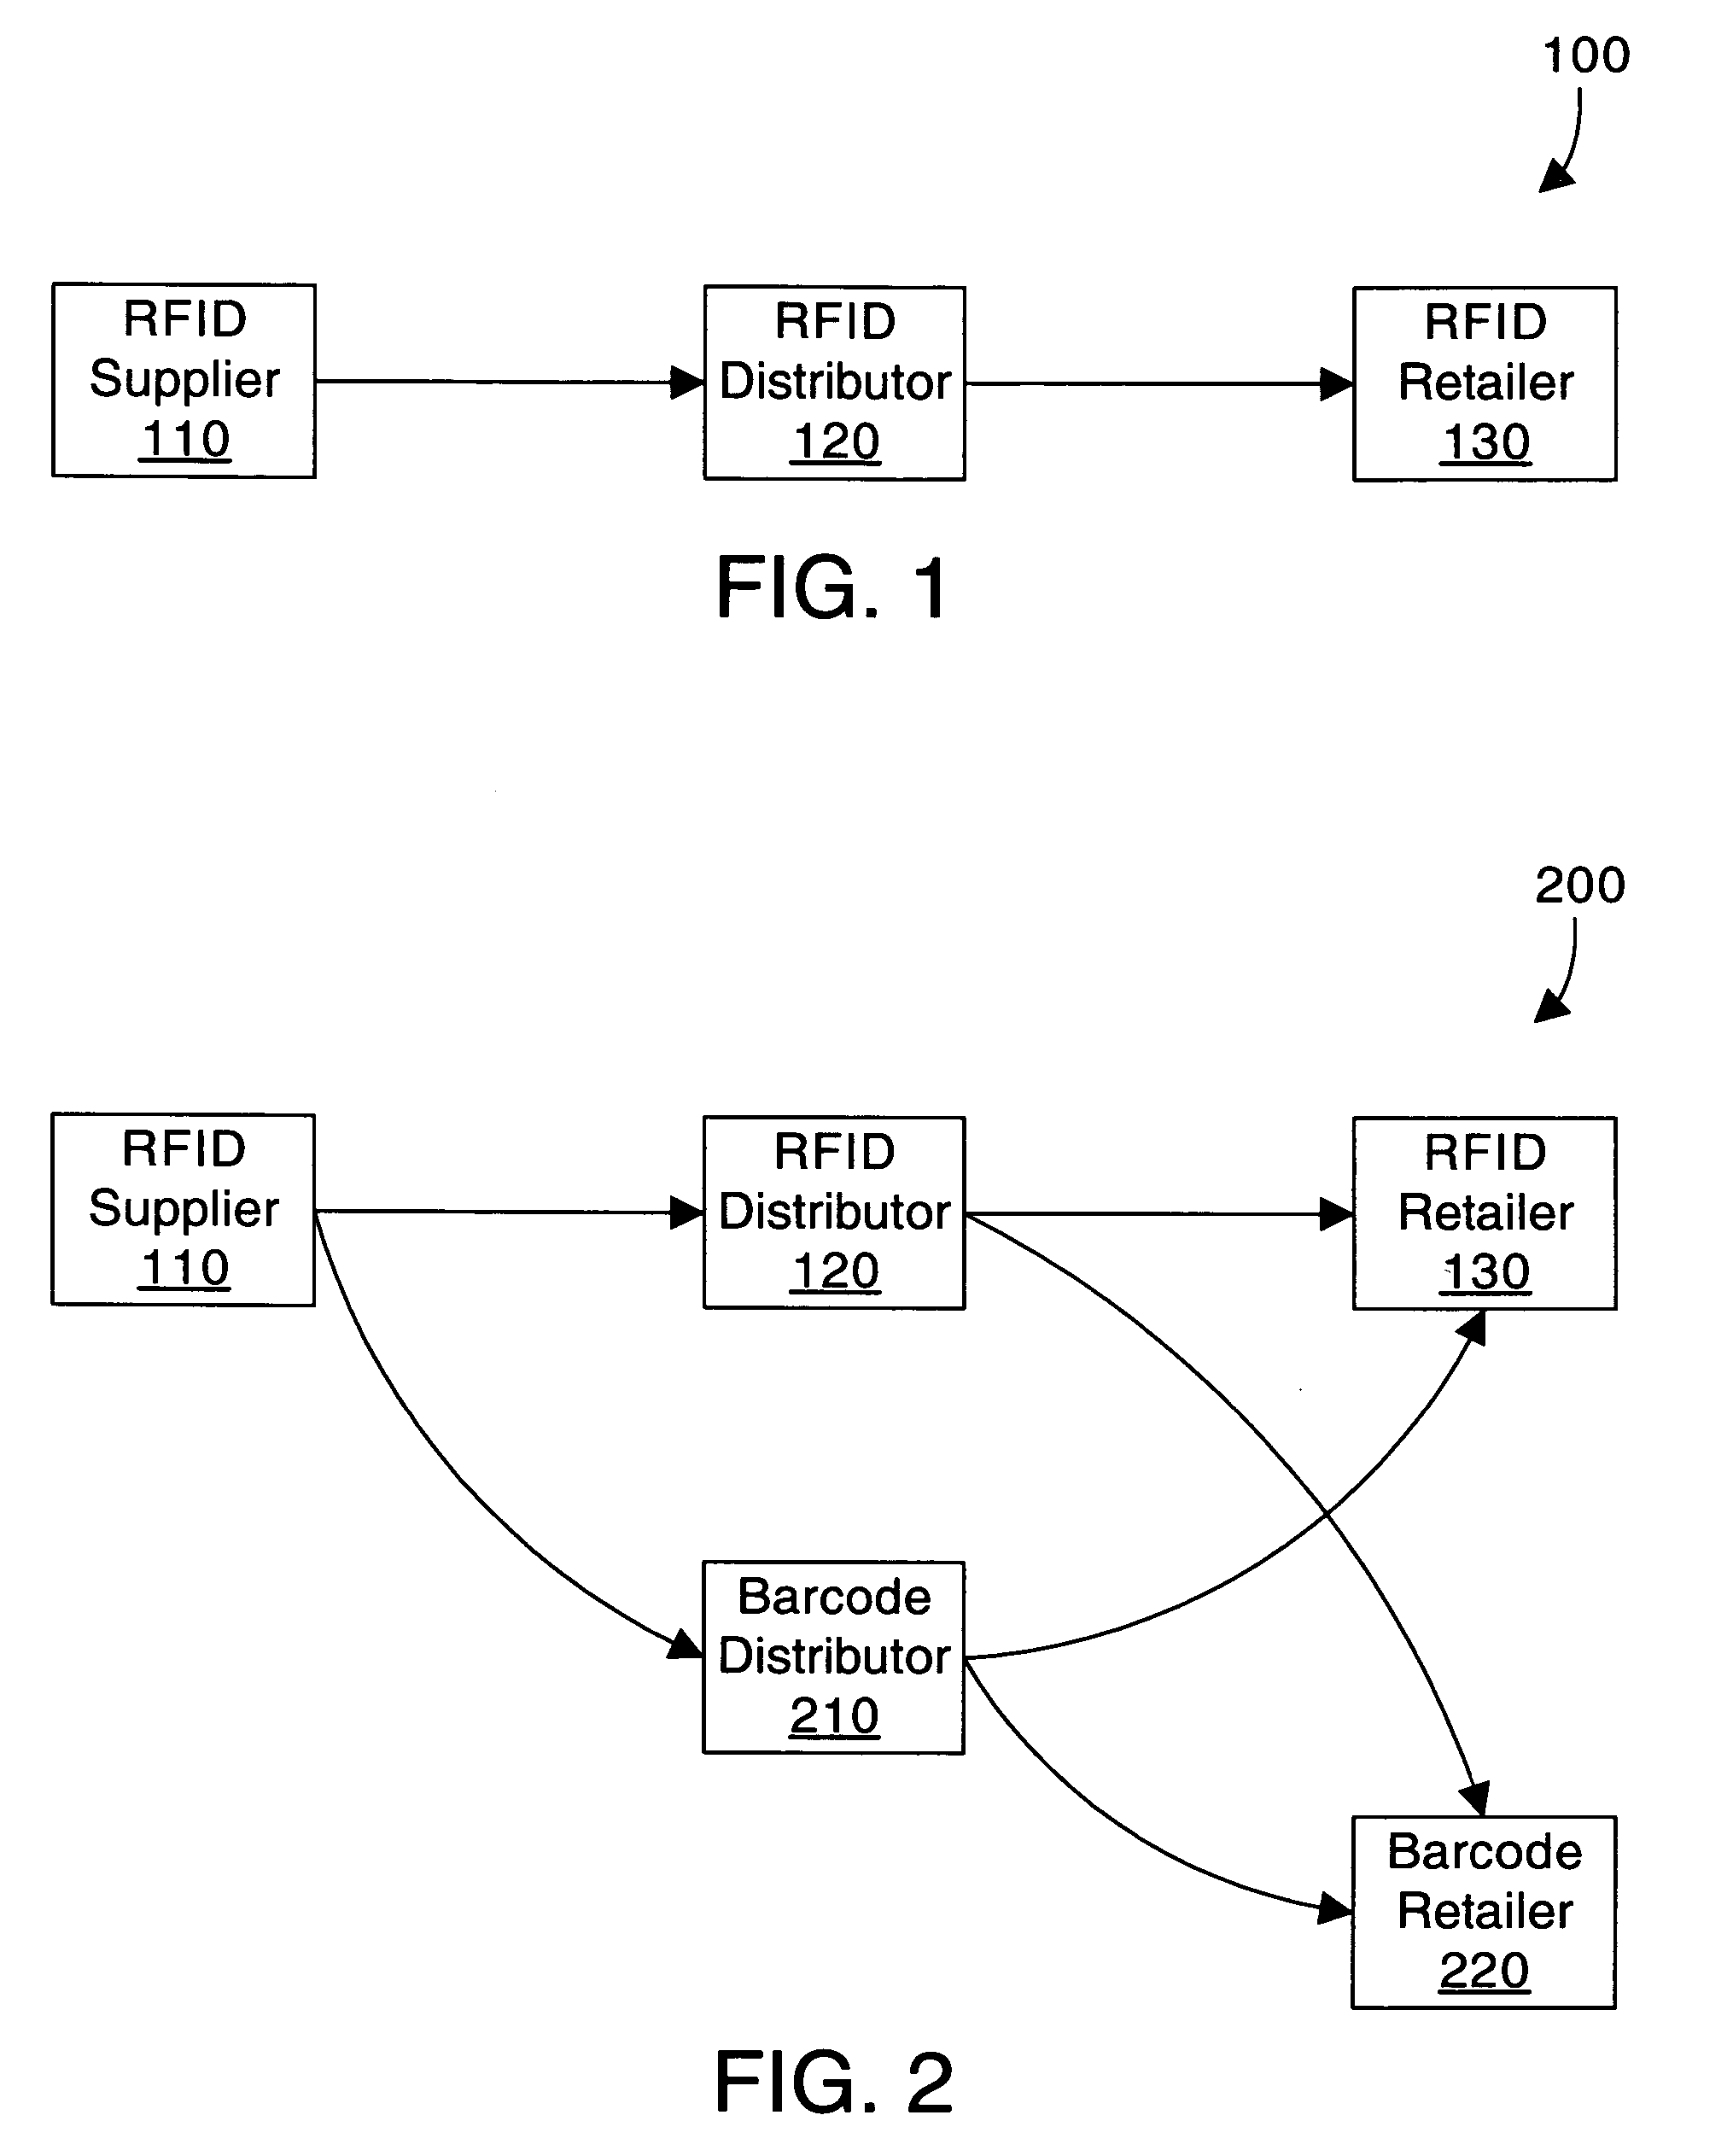 Pallet content identification mechanism that converts RFID information to corresponding barcode information